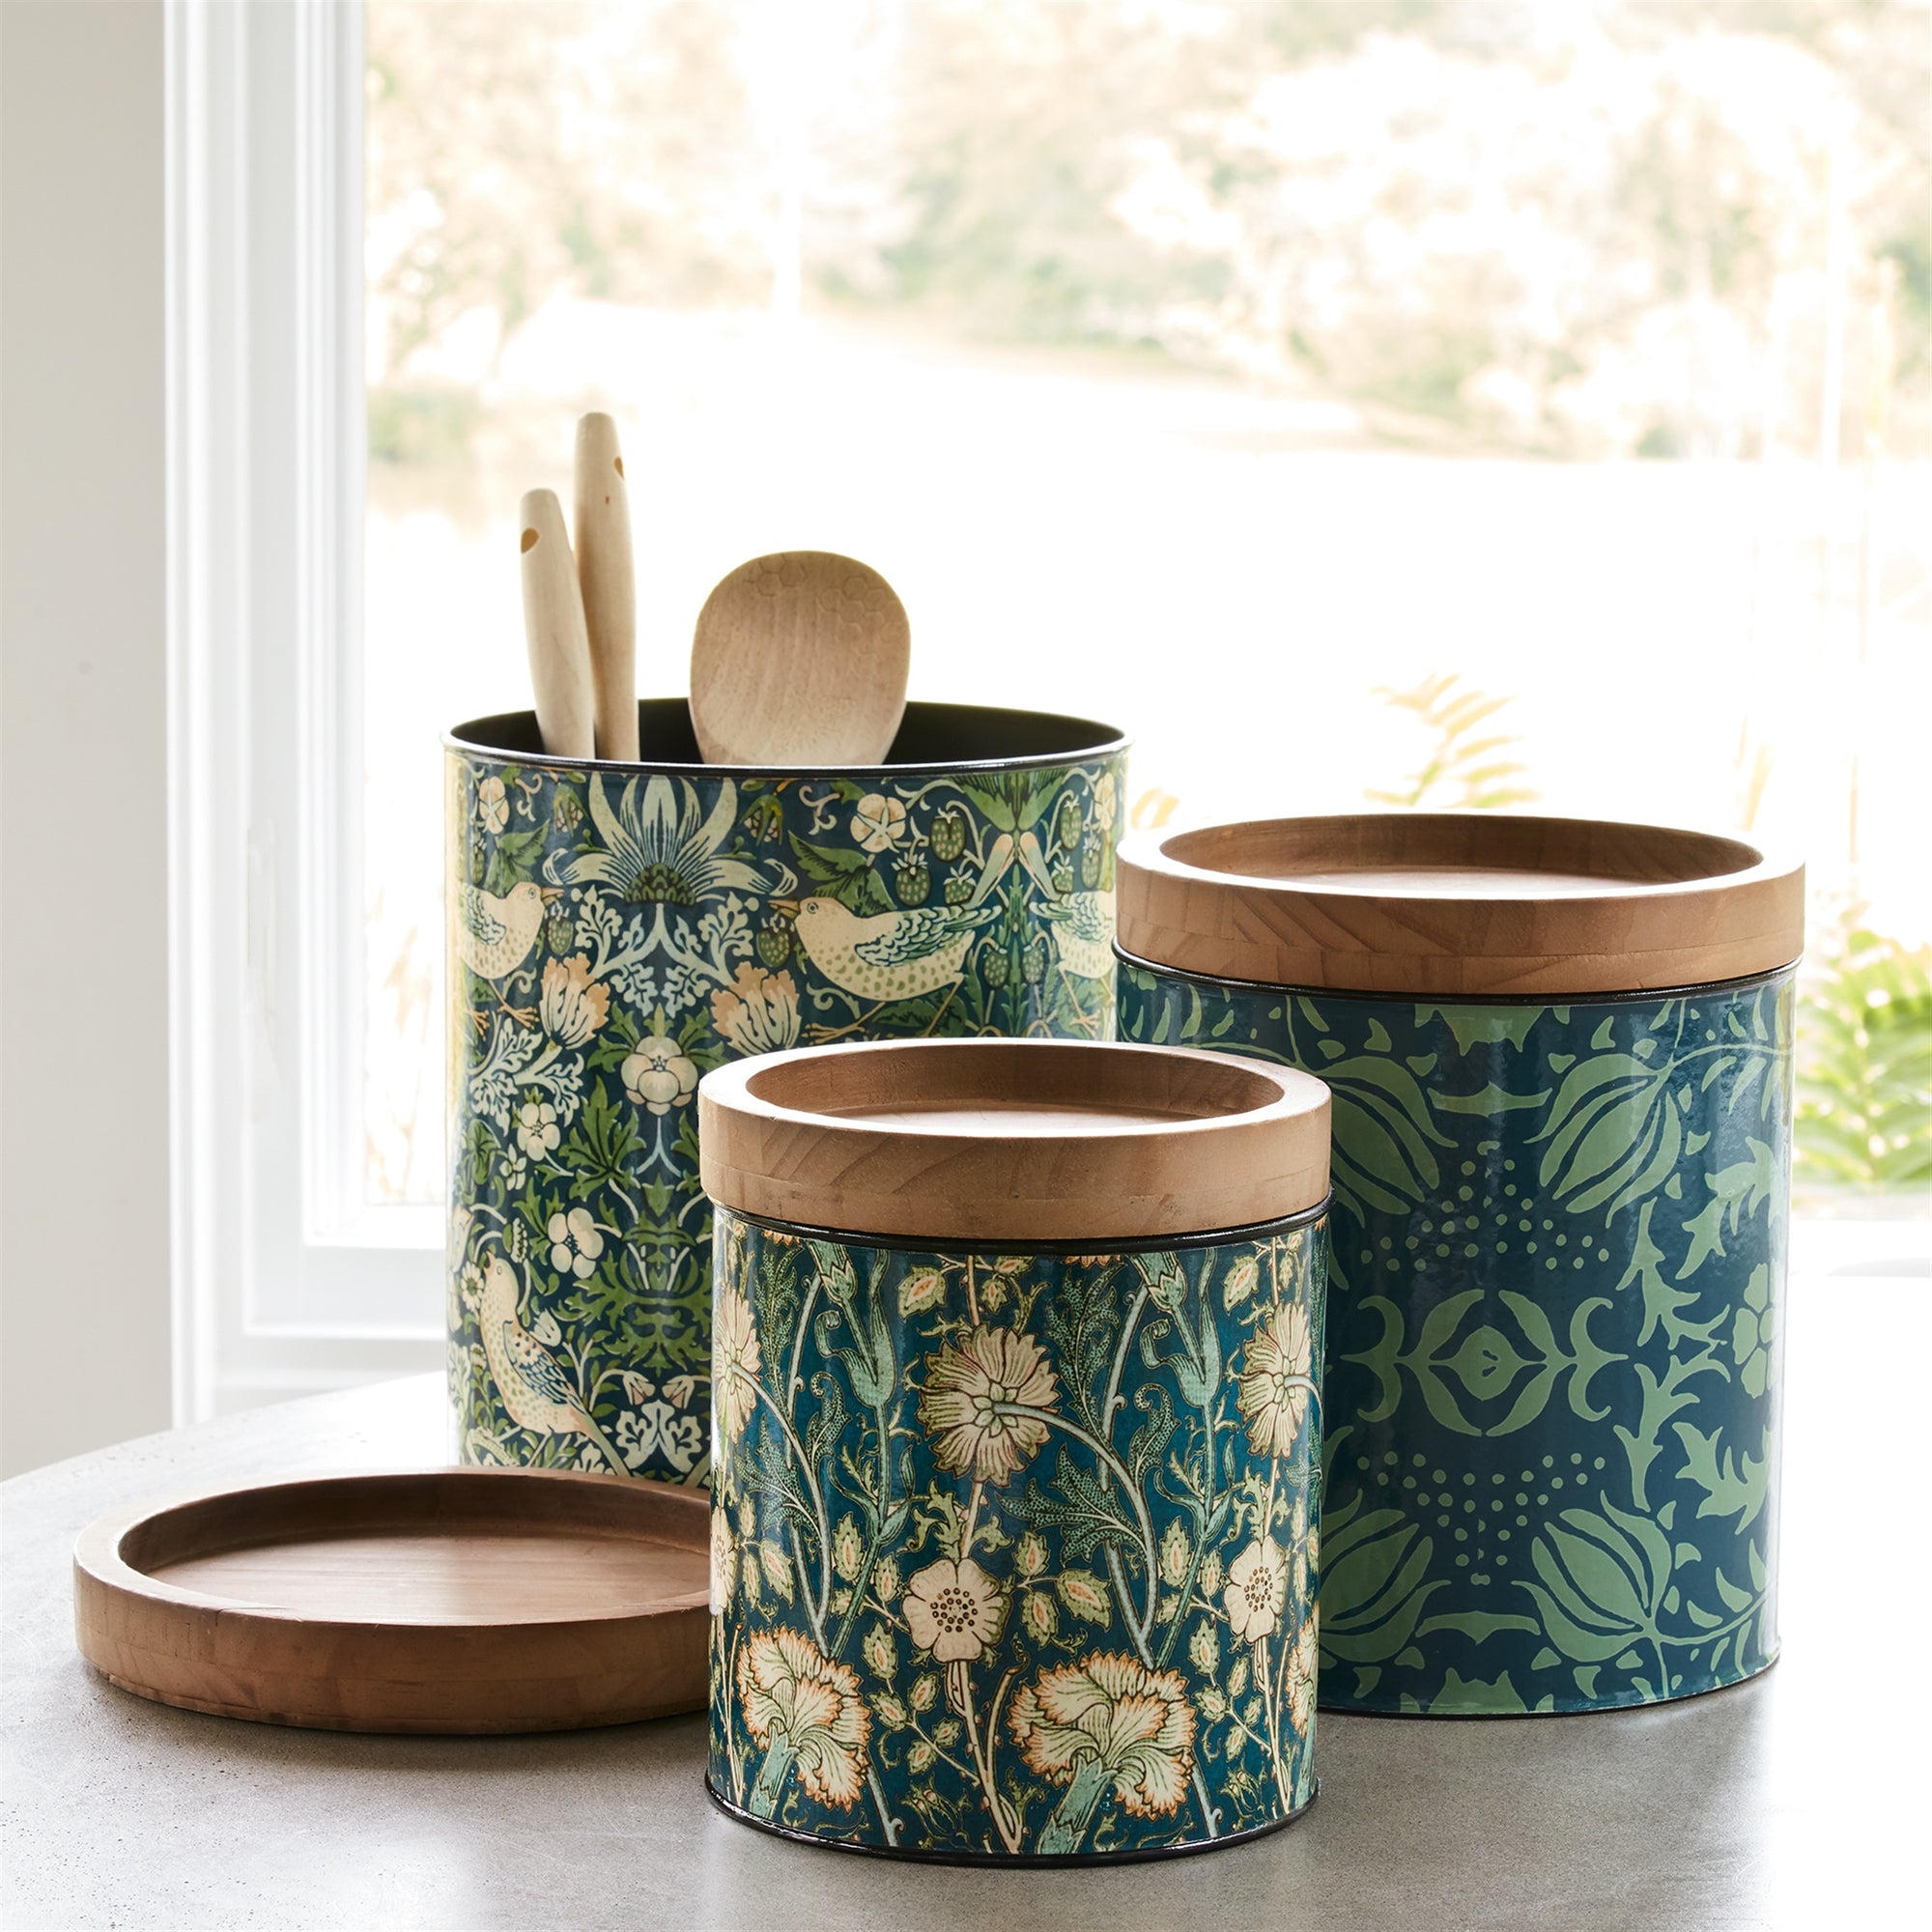 Set of 3 William Morris Canisters